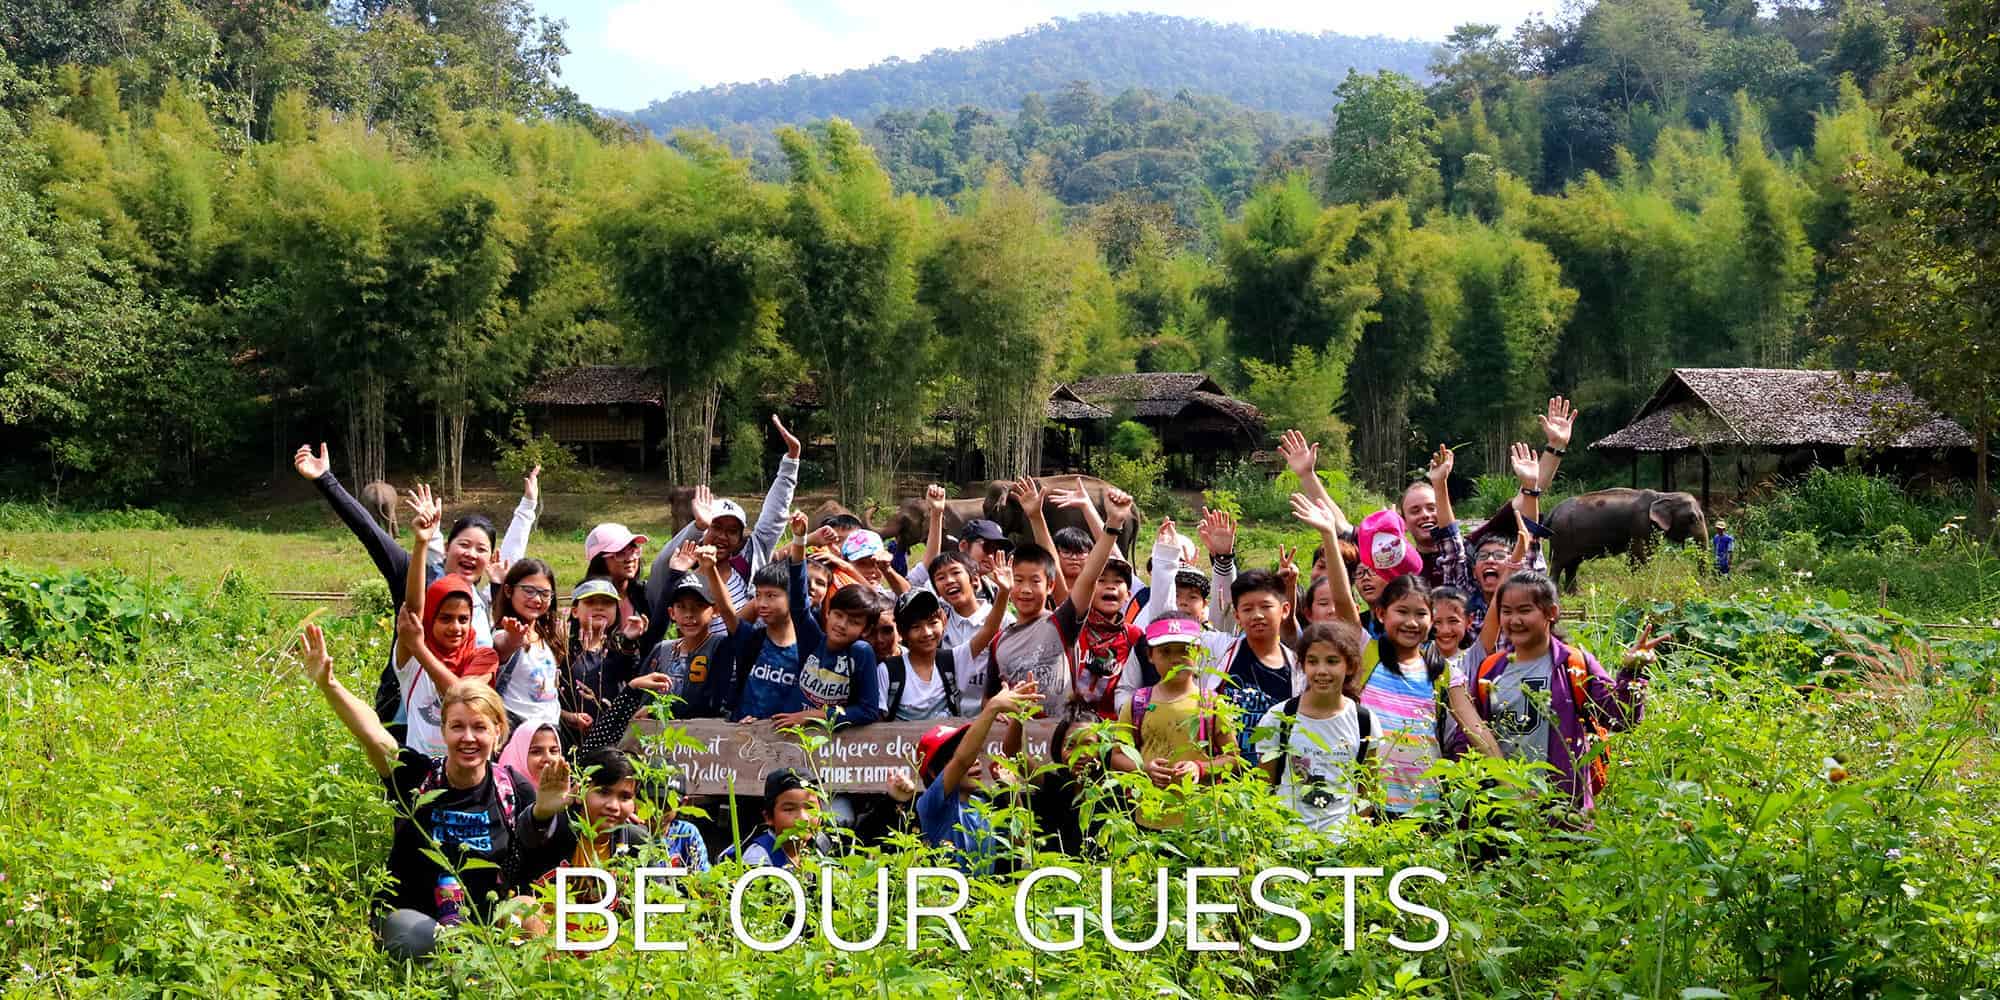 Walk with elephants at the eco-travel, wilderness adventure at Elephant EcoValley near Chiang Mai and be our guest!